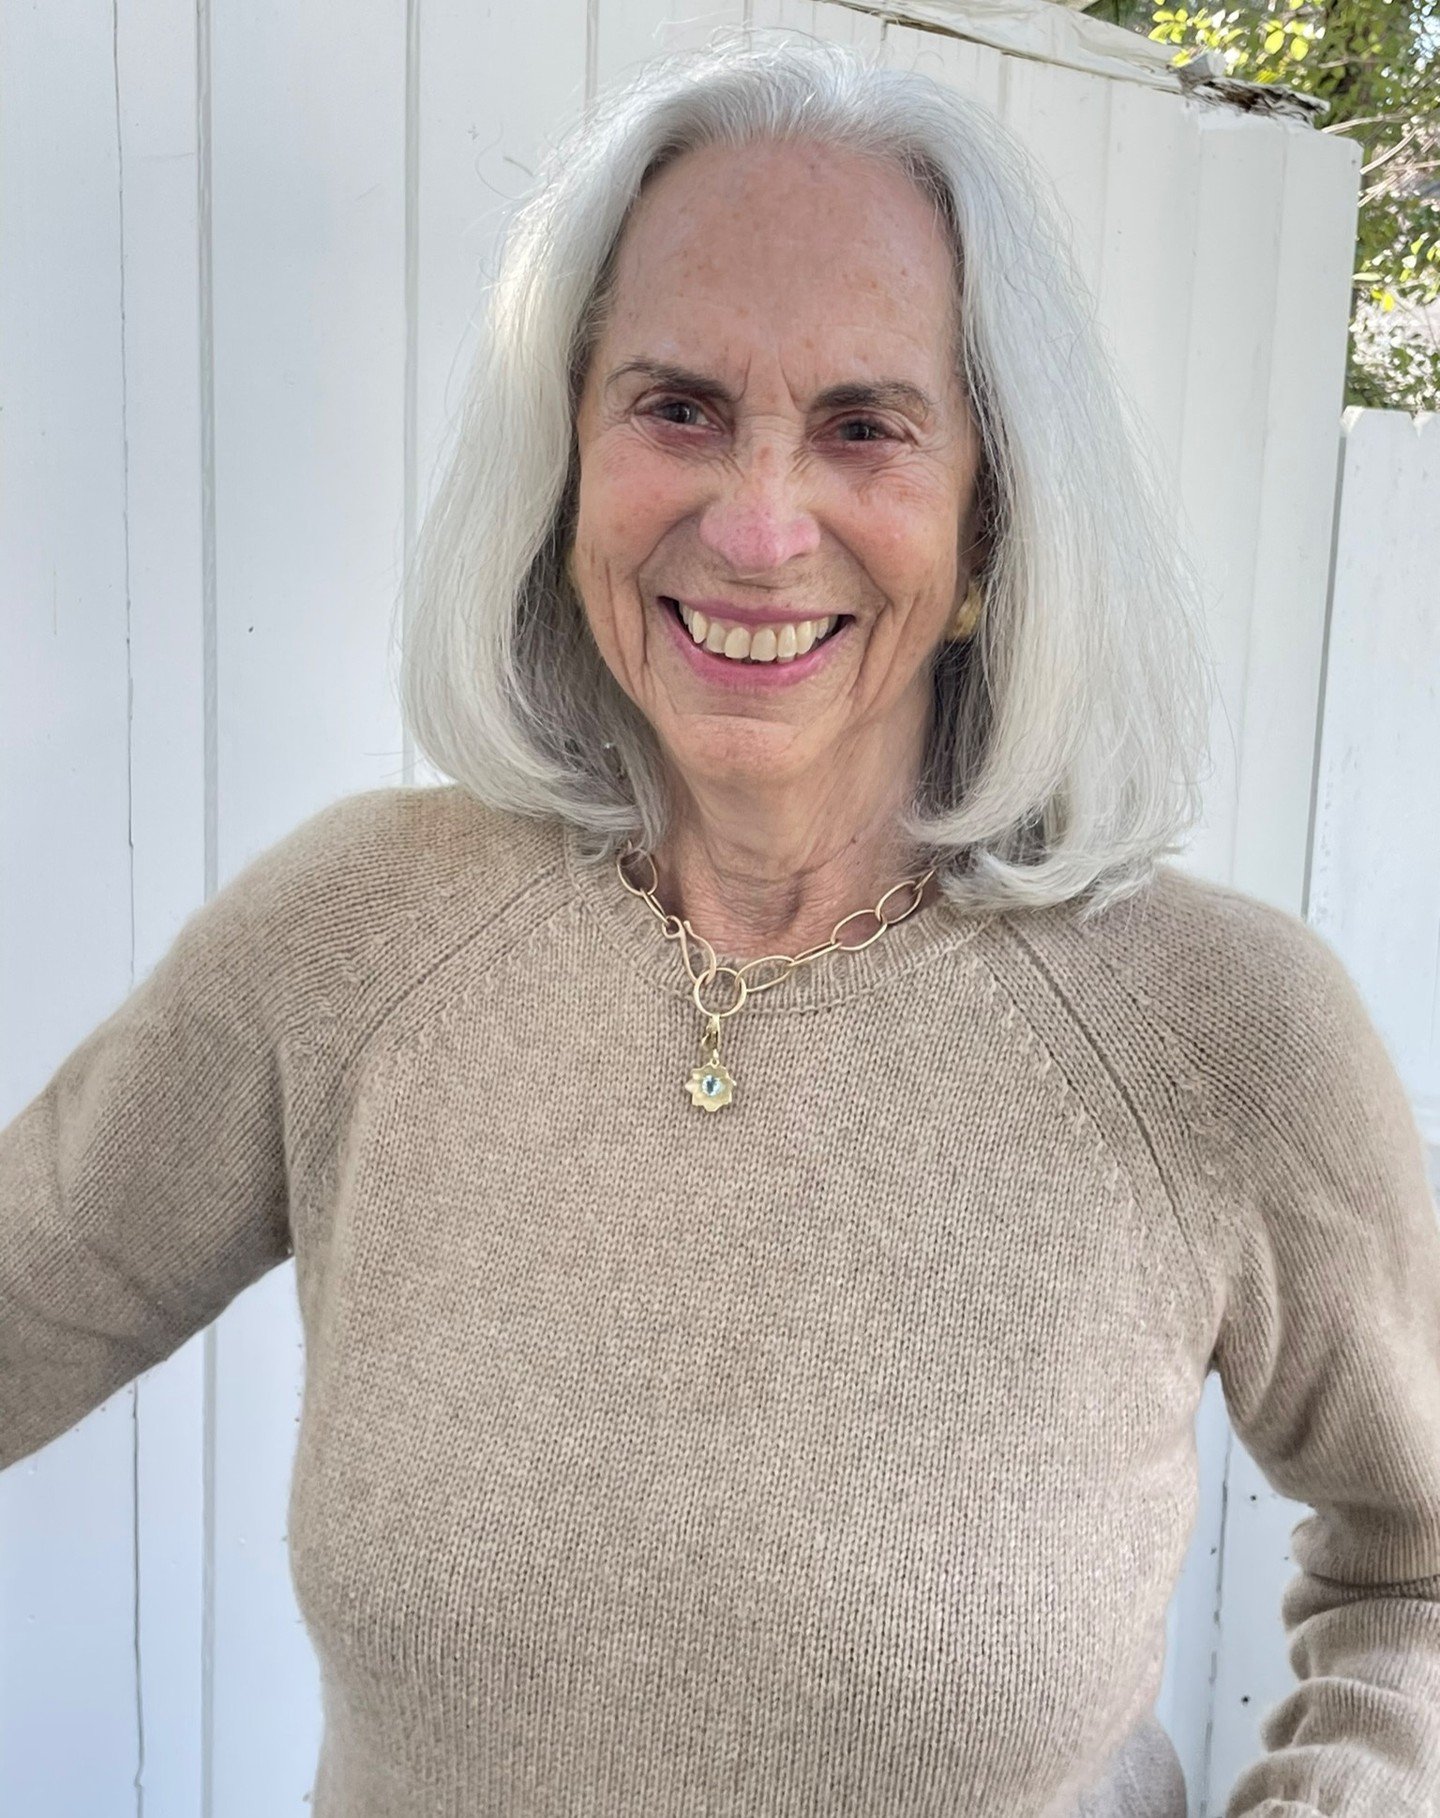 Since Mother's Day is just around the corner.....I thought I would include my own Mom who has always been my biggest and best brand ambassador. Here she is wearing the Aqua Marine Blossom charm available @gardeshop. #lisaziffdesigns #blossom #mothers